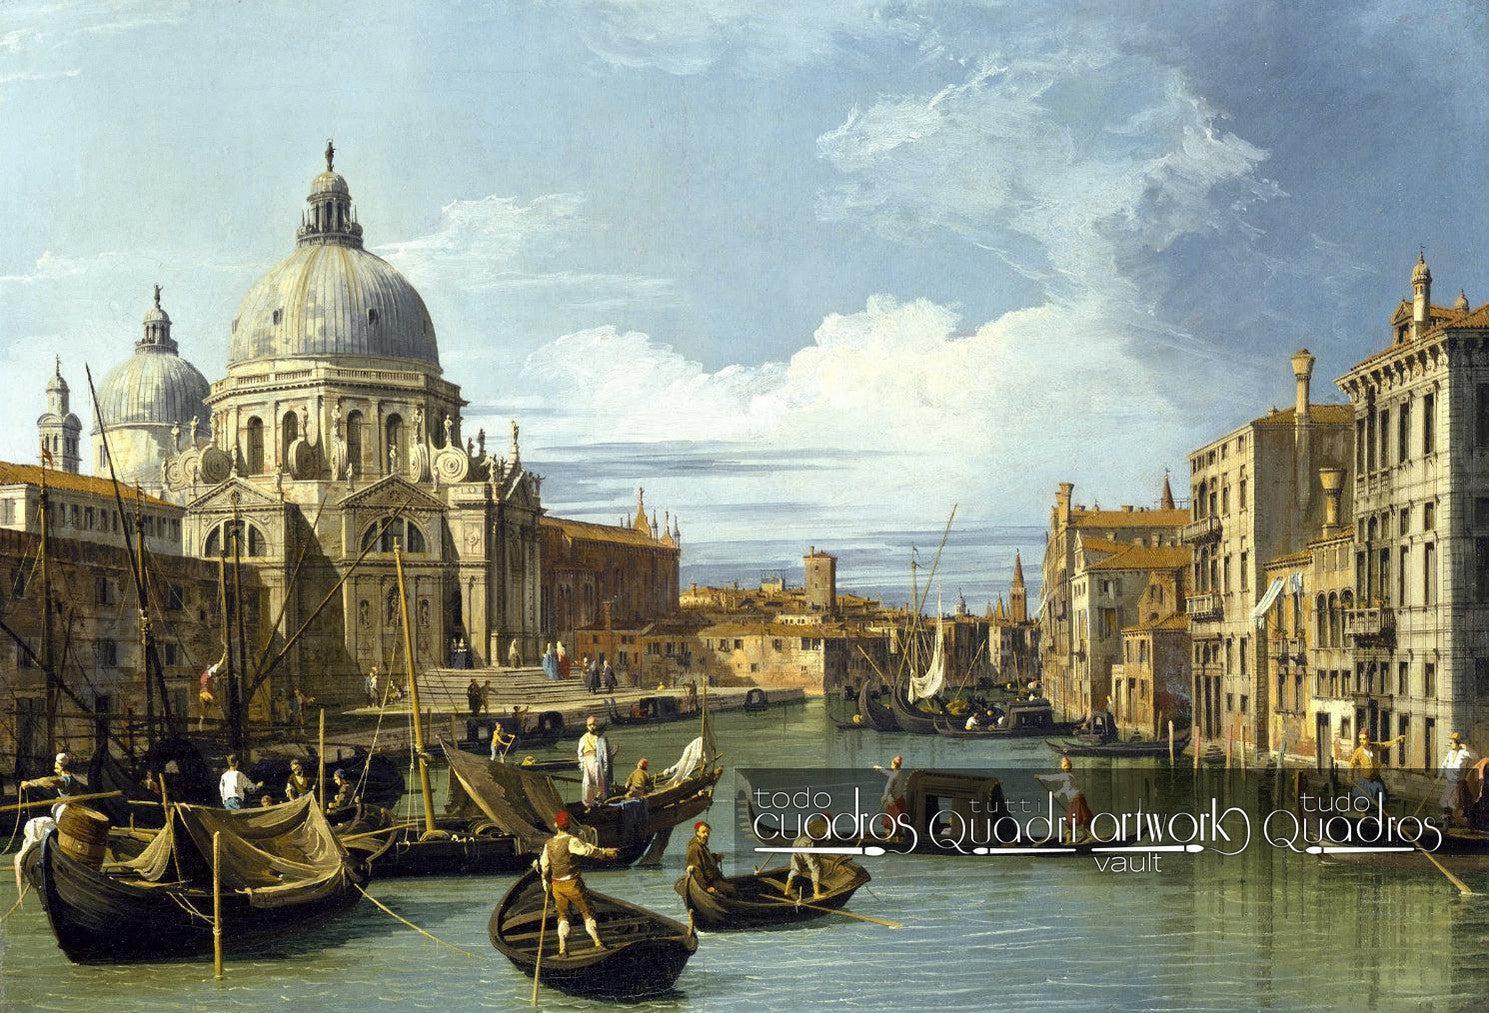 Entrance to the Grand Canal Venice, Canaletto 